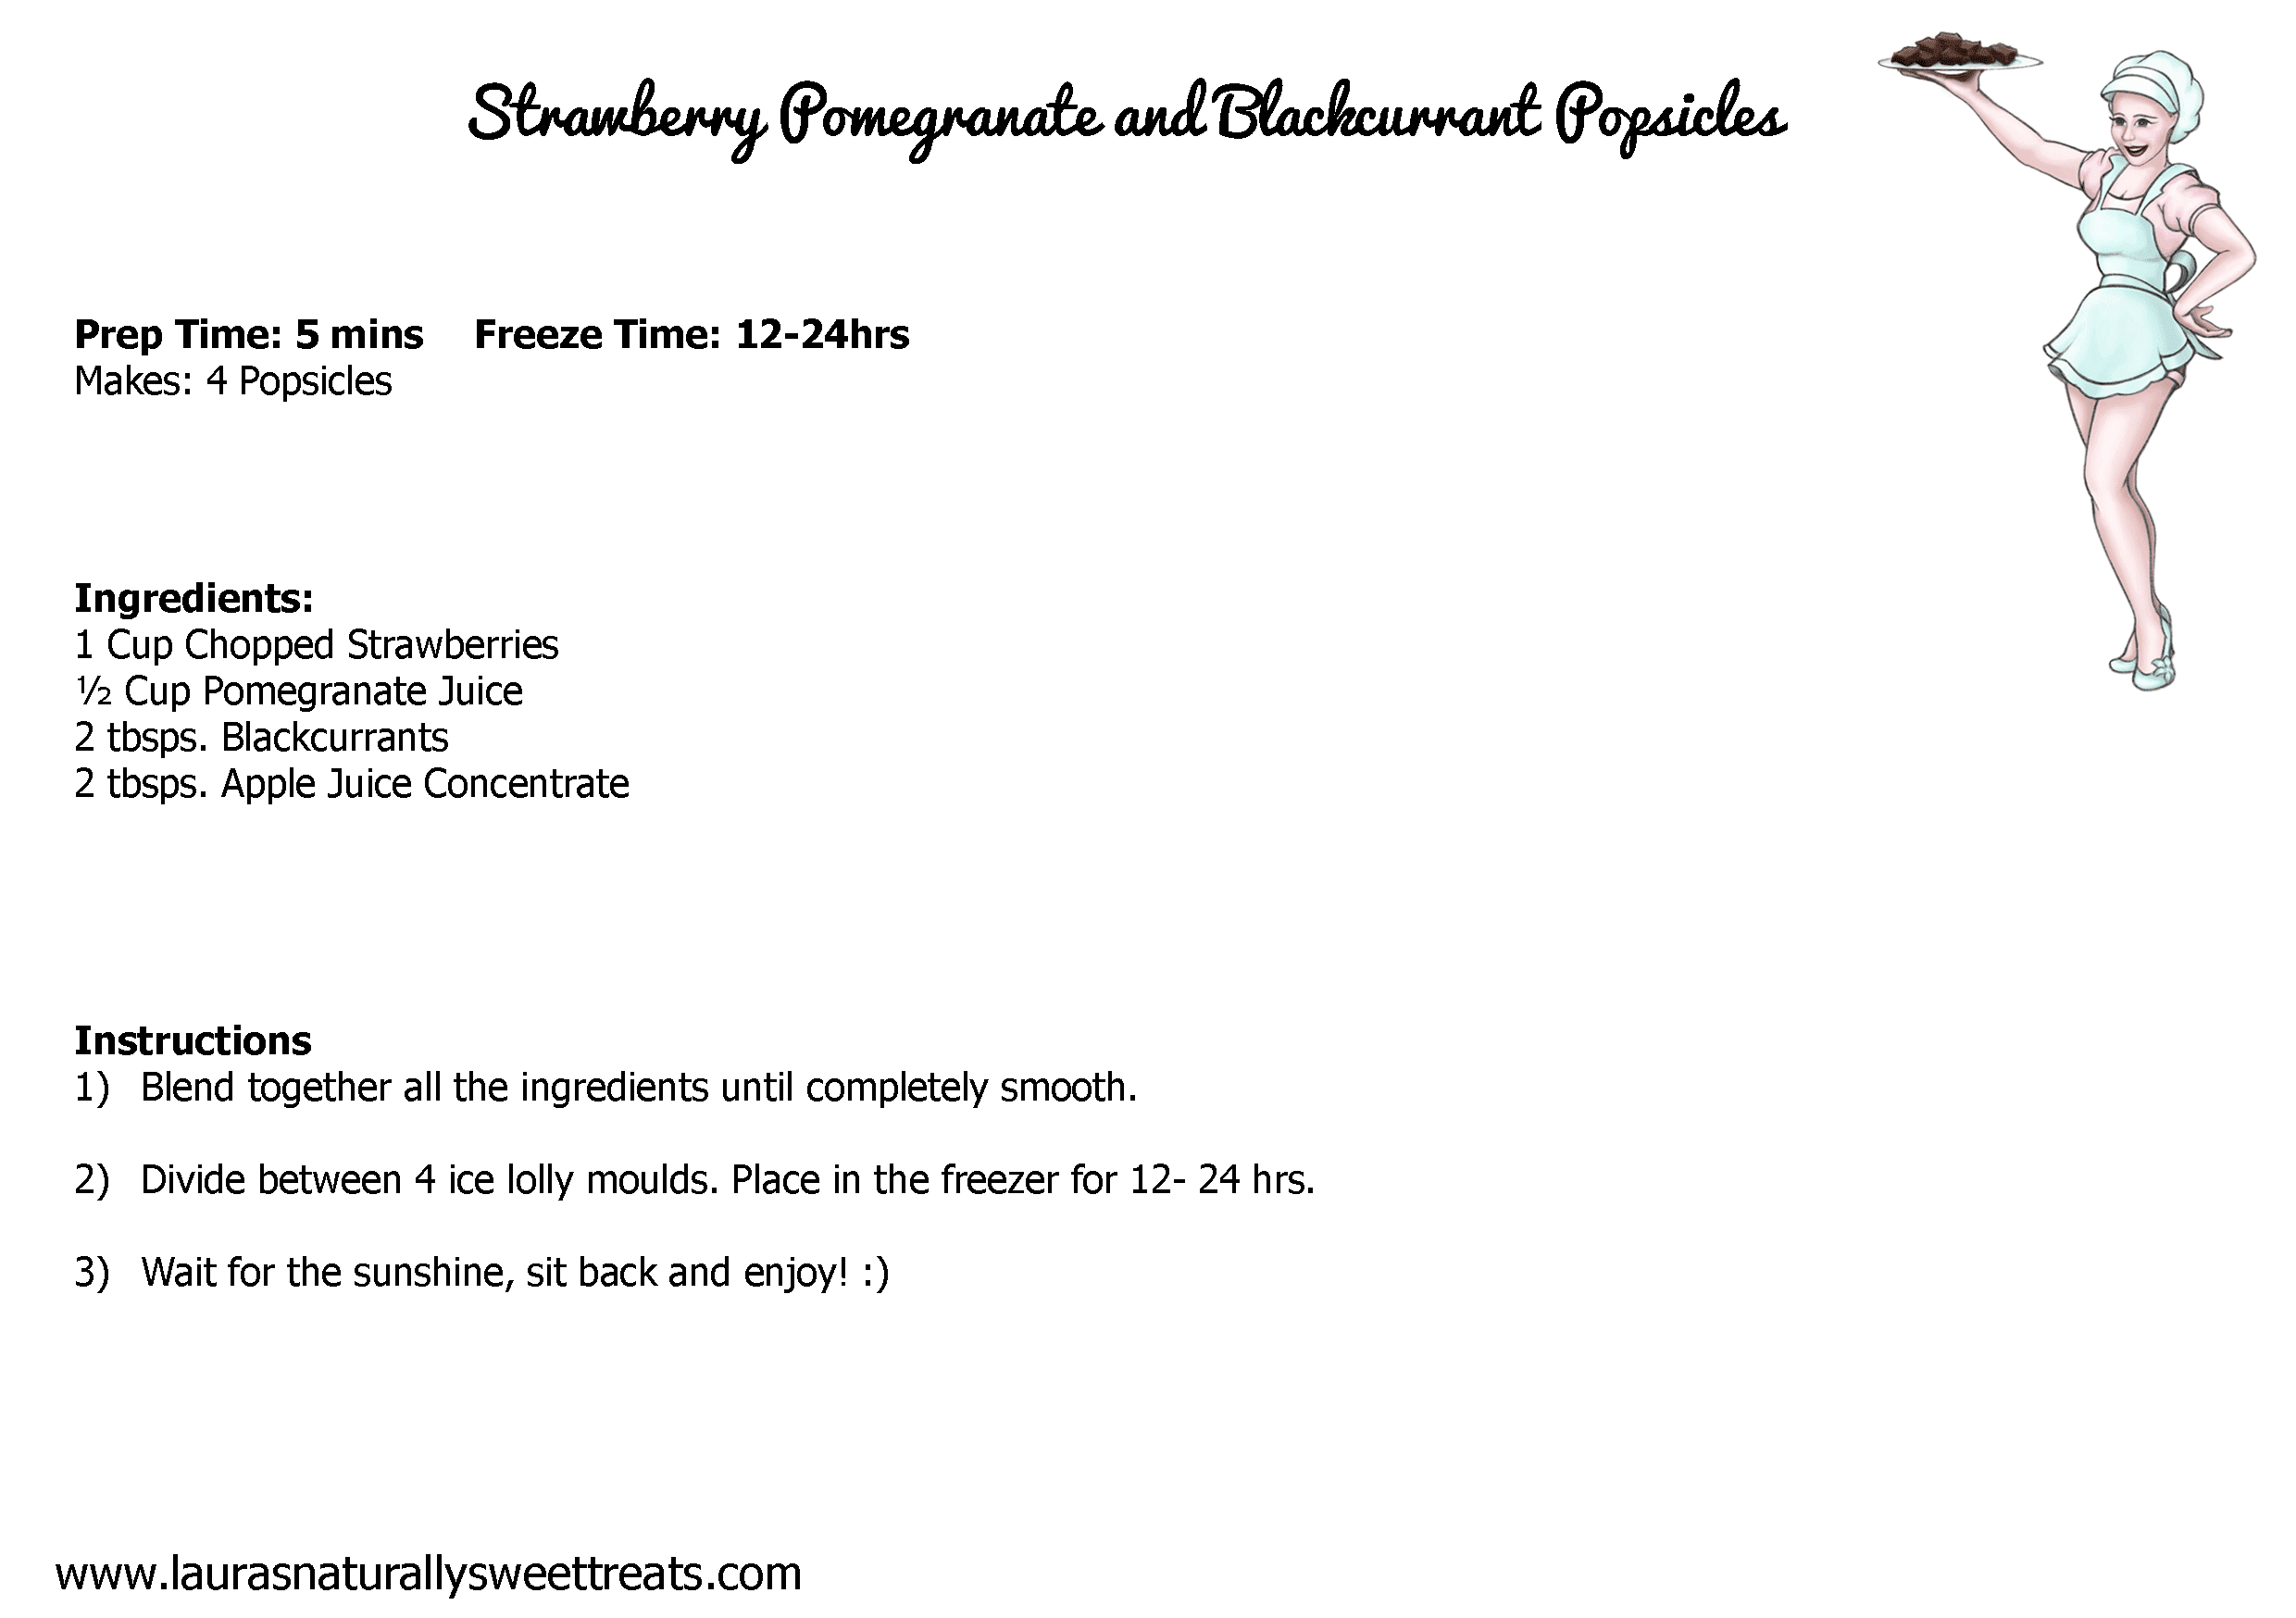 strawberry pomegranate and blackcurrant popsicles recipe card